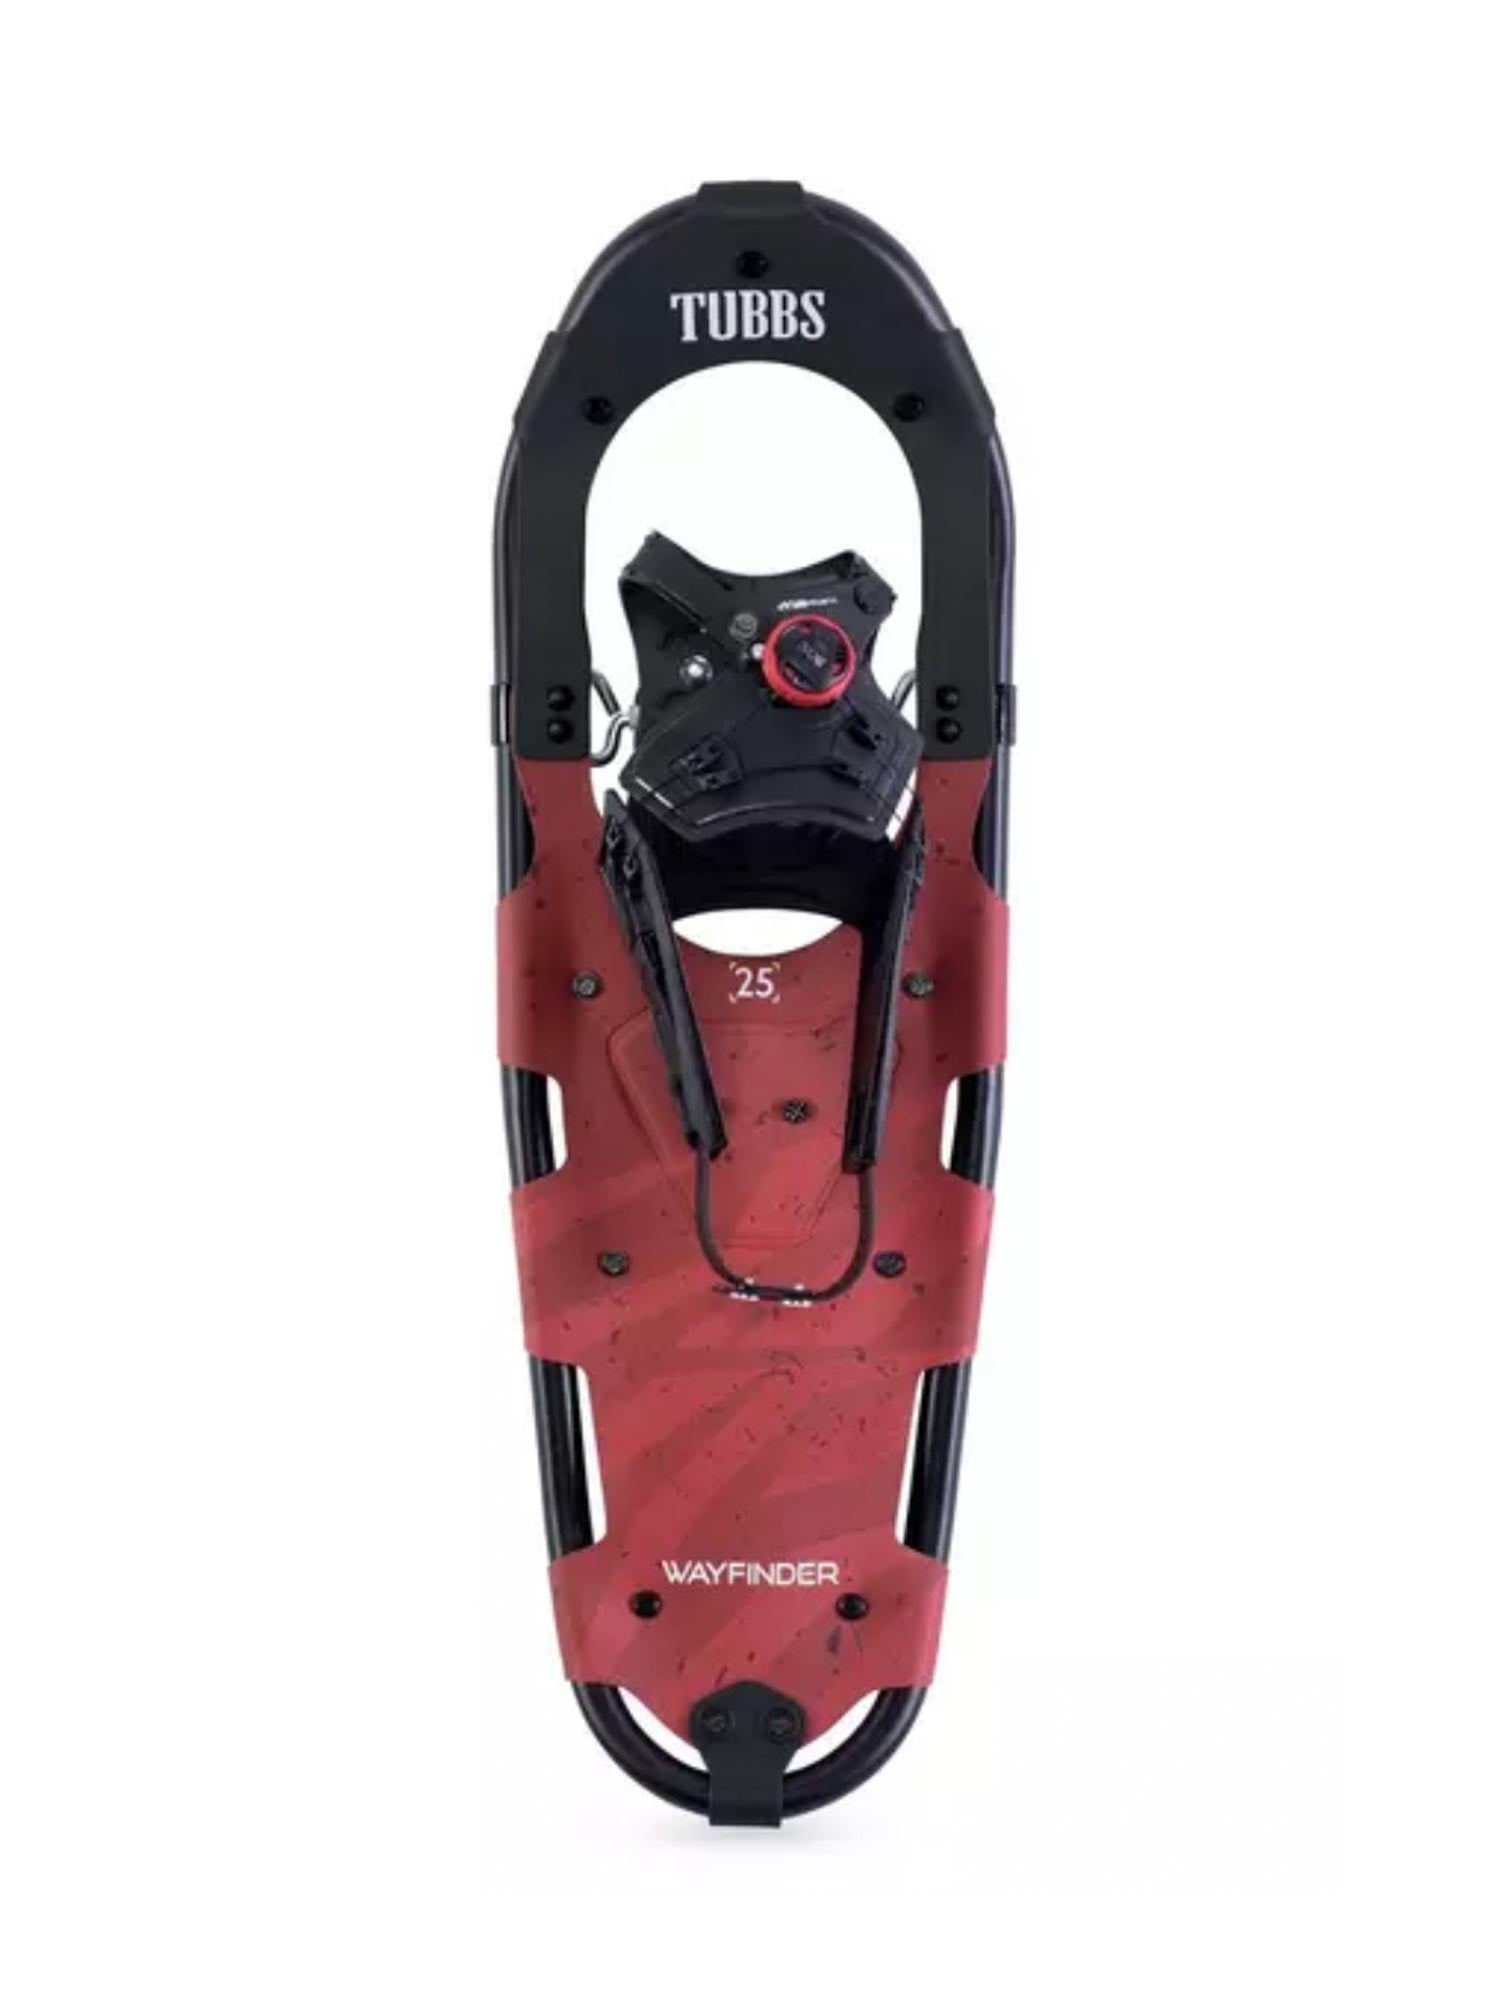 men's Tubbs snowshoes, black and red